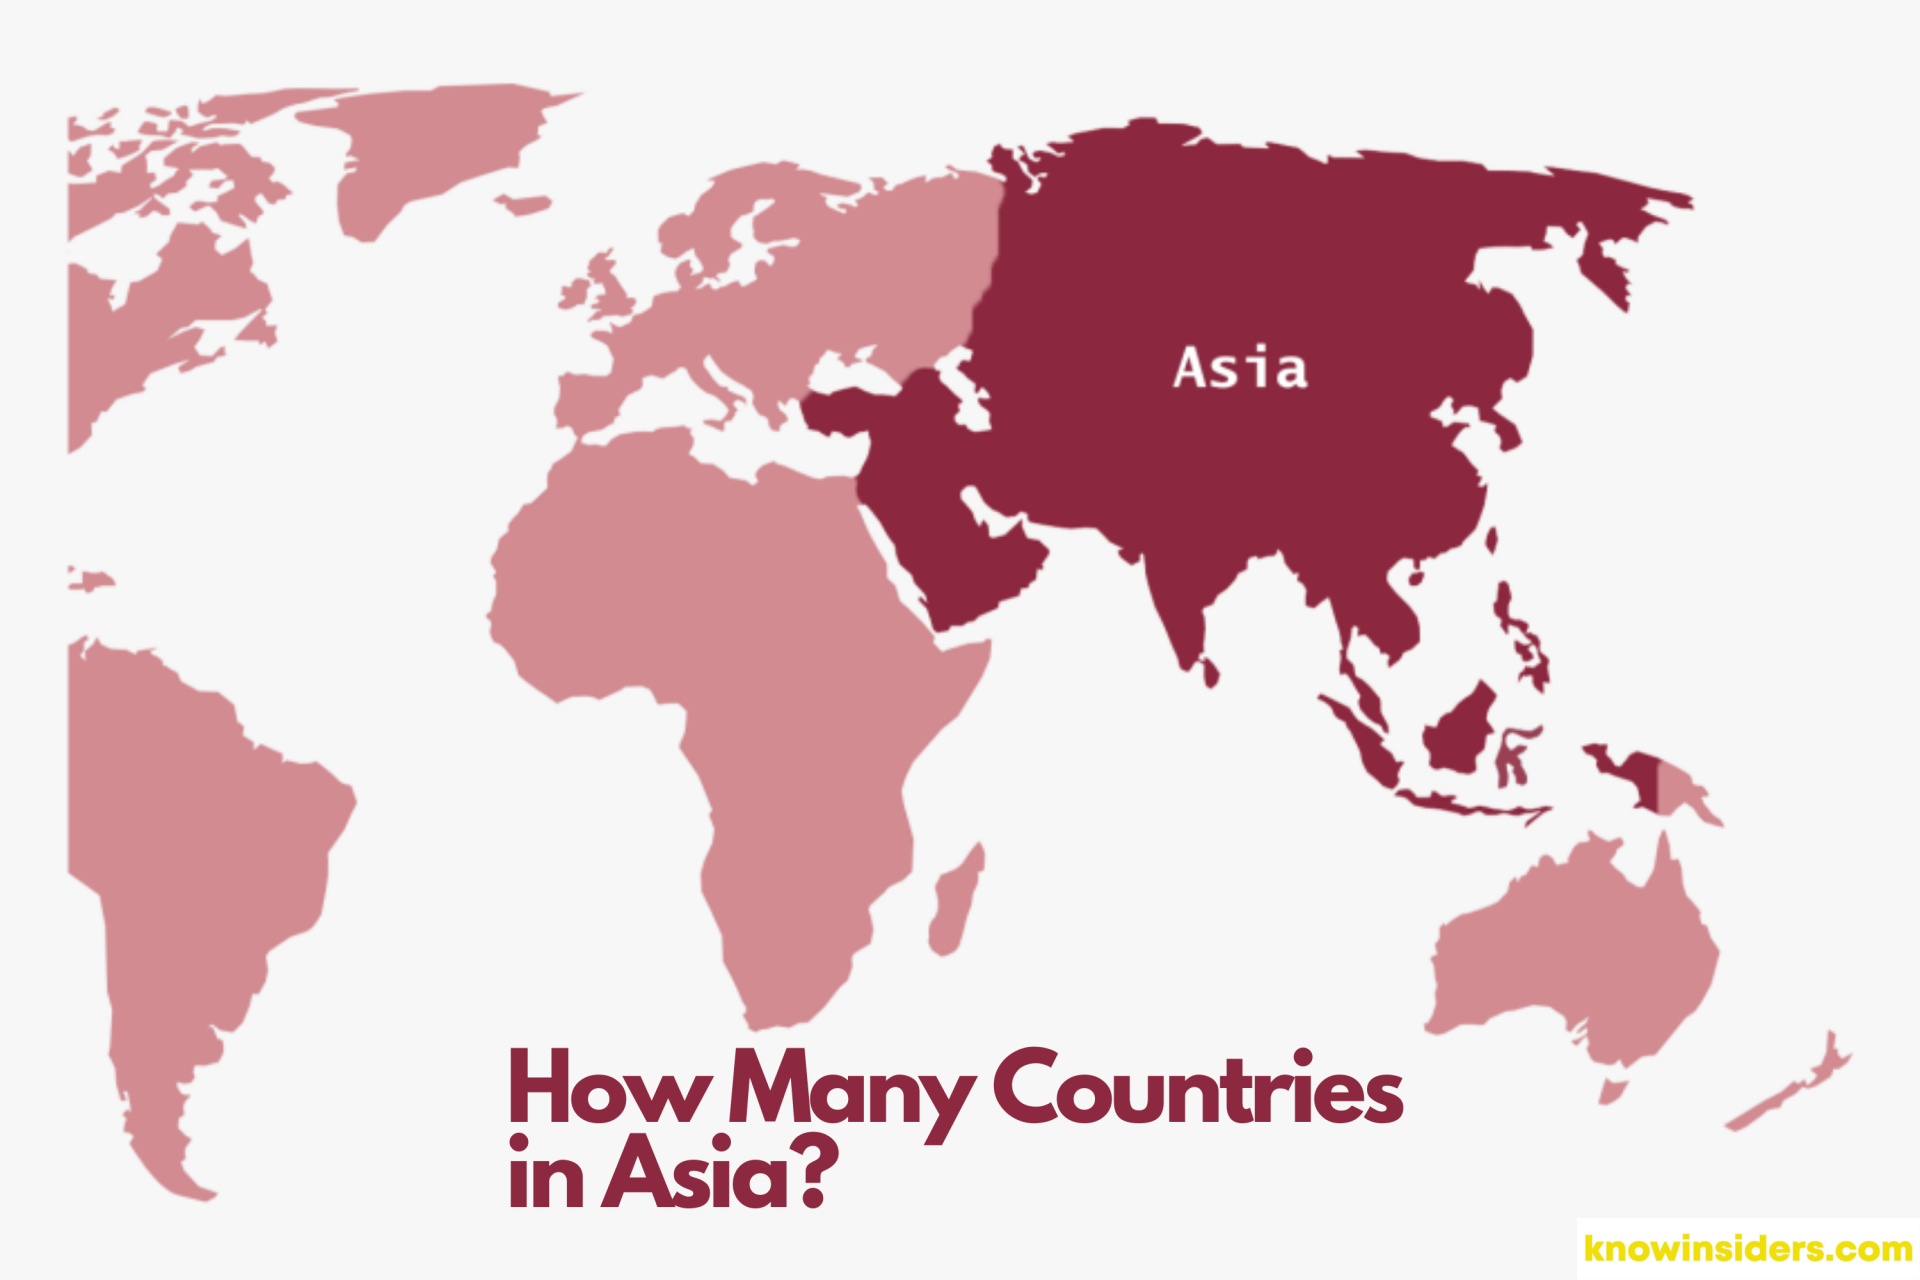 How Many Countries Are There In Asia: Facts, Figures and Population